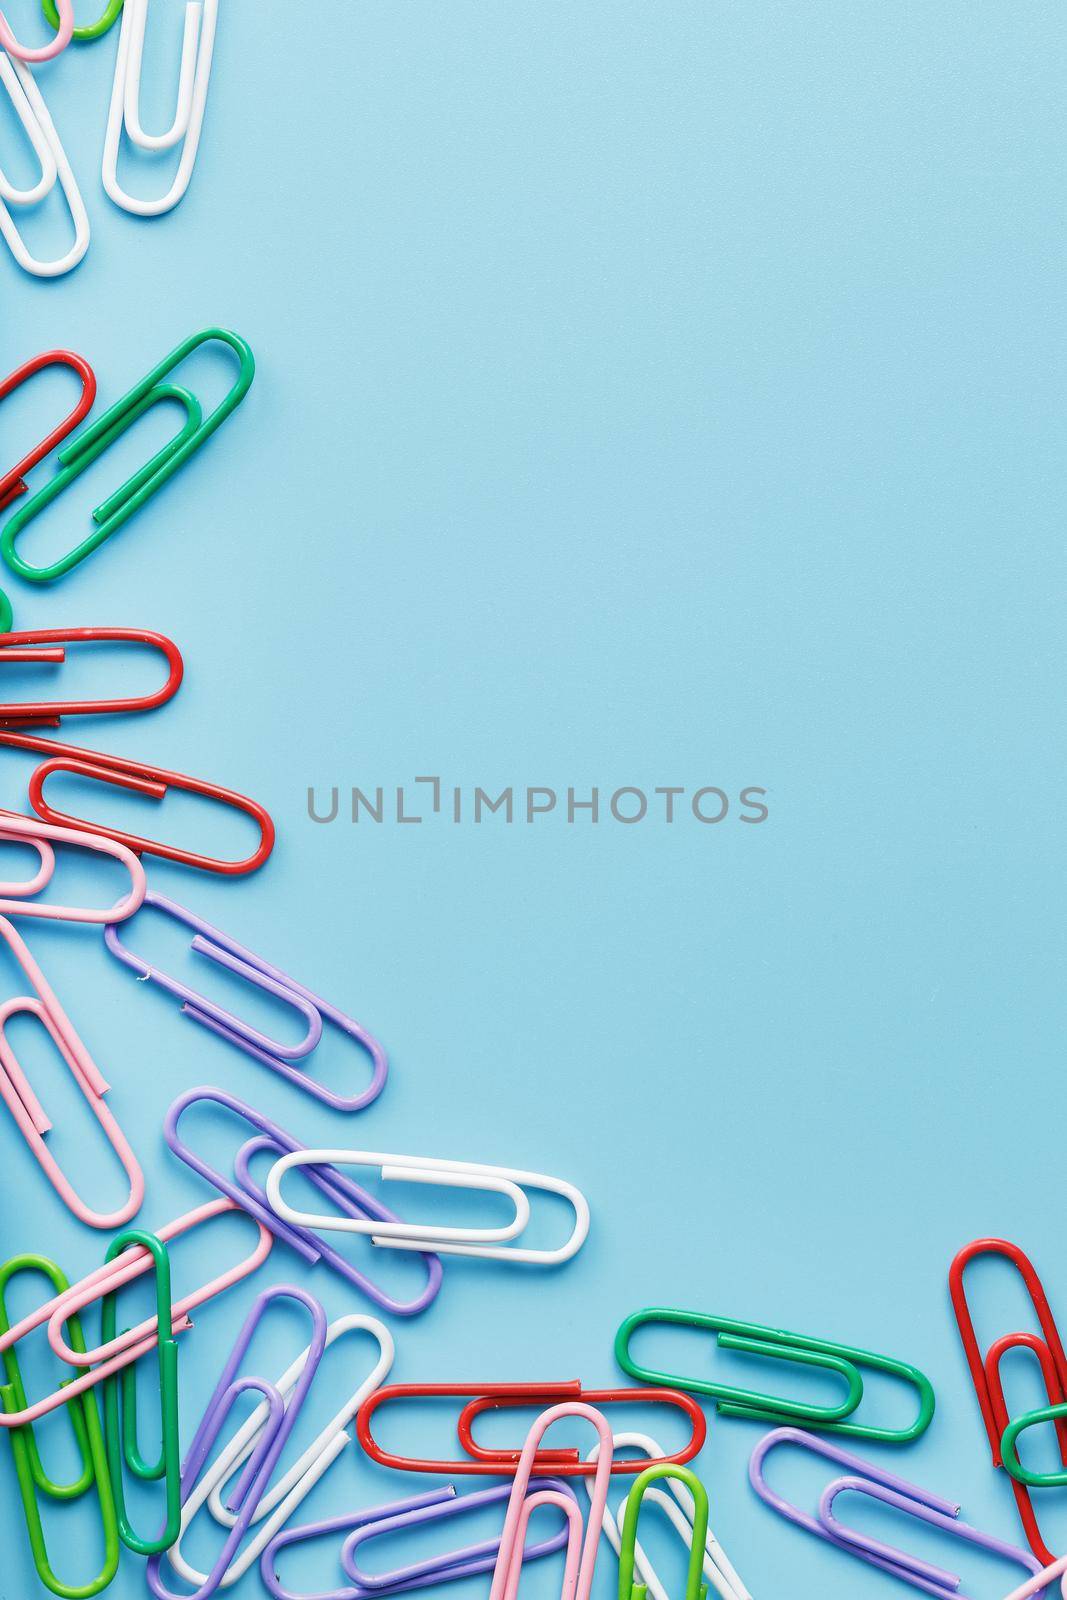 Multicolored paper clips on a blue background. by AlexGrec